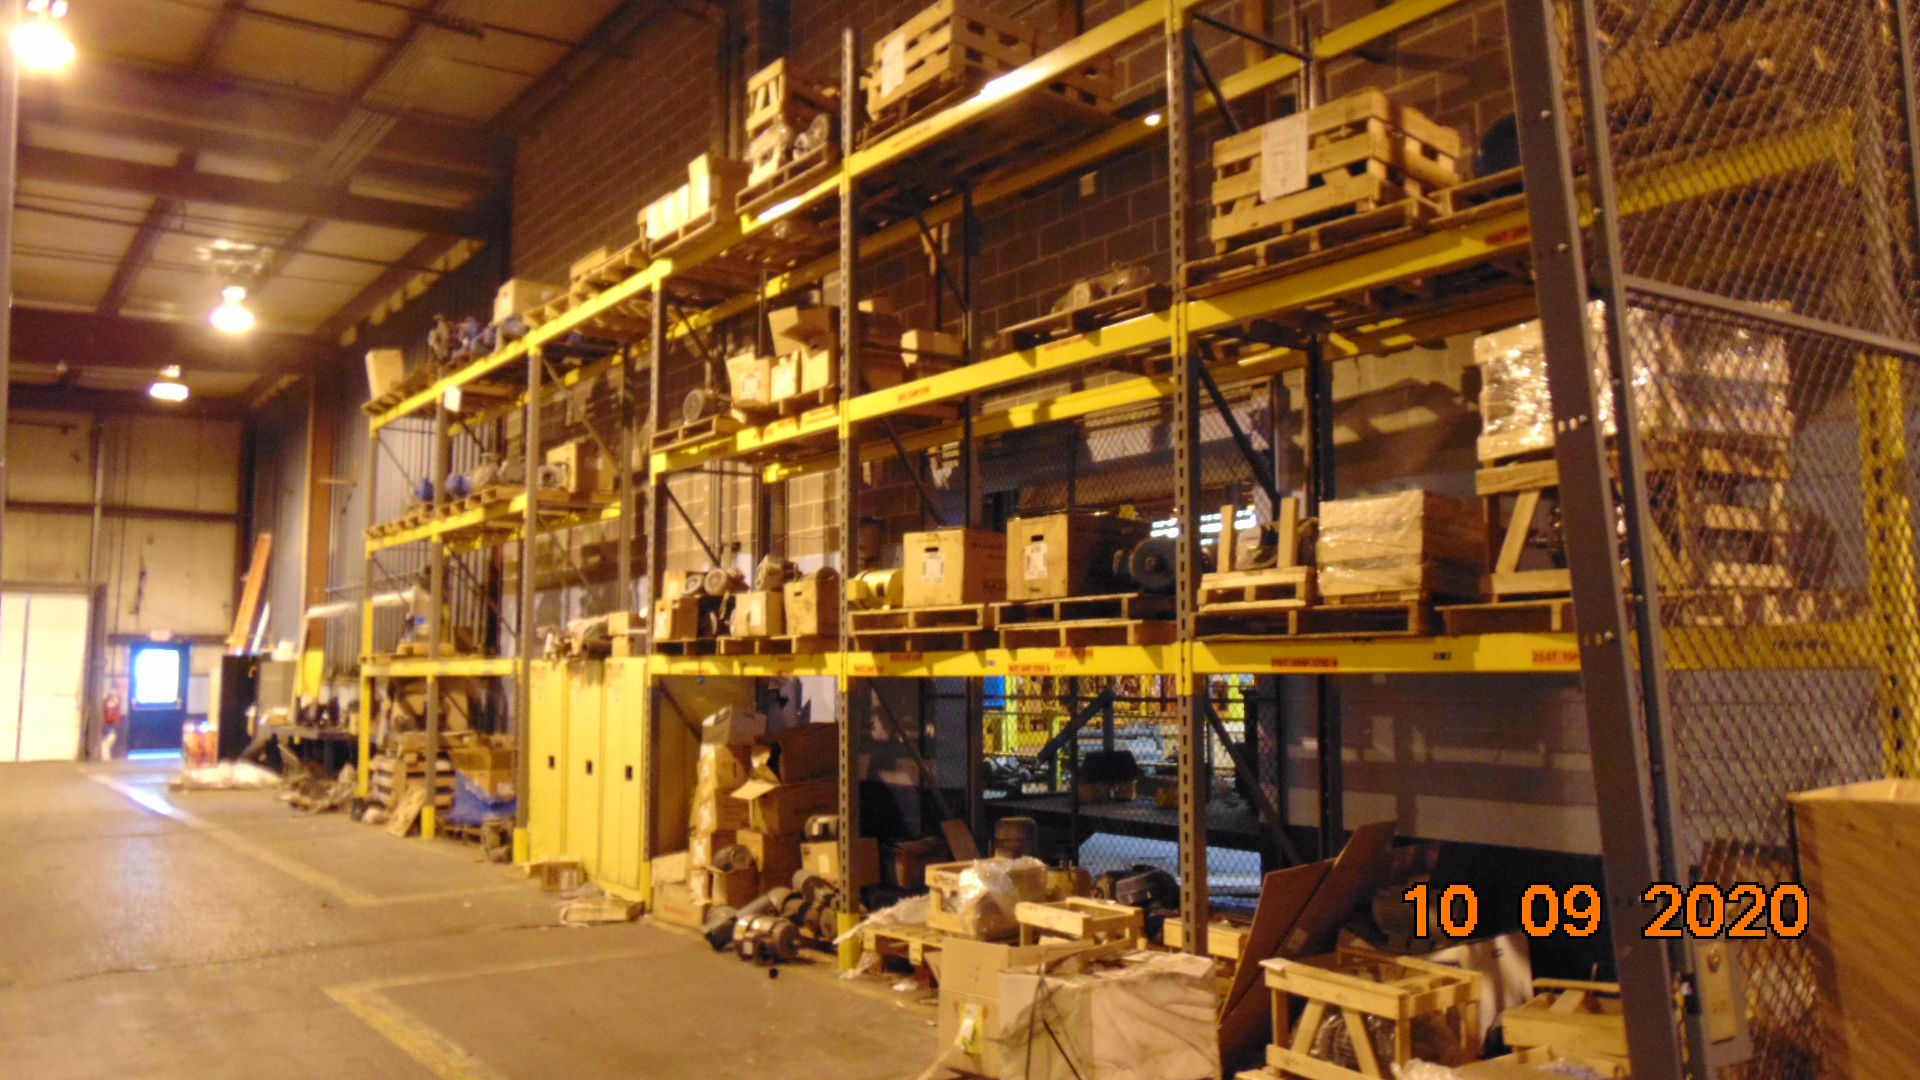 Contents of Warehouse / Industrial Building - Image 20 of 26